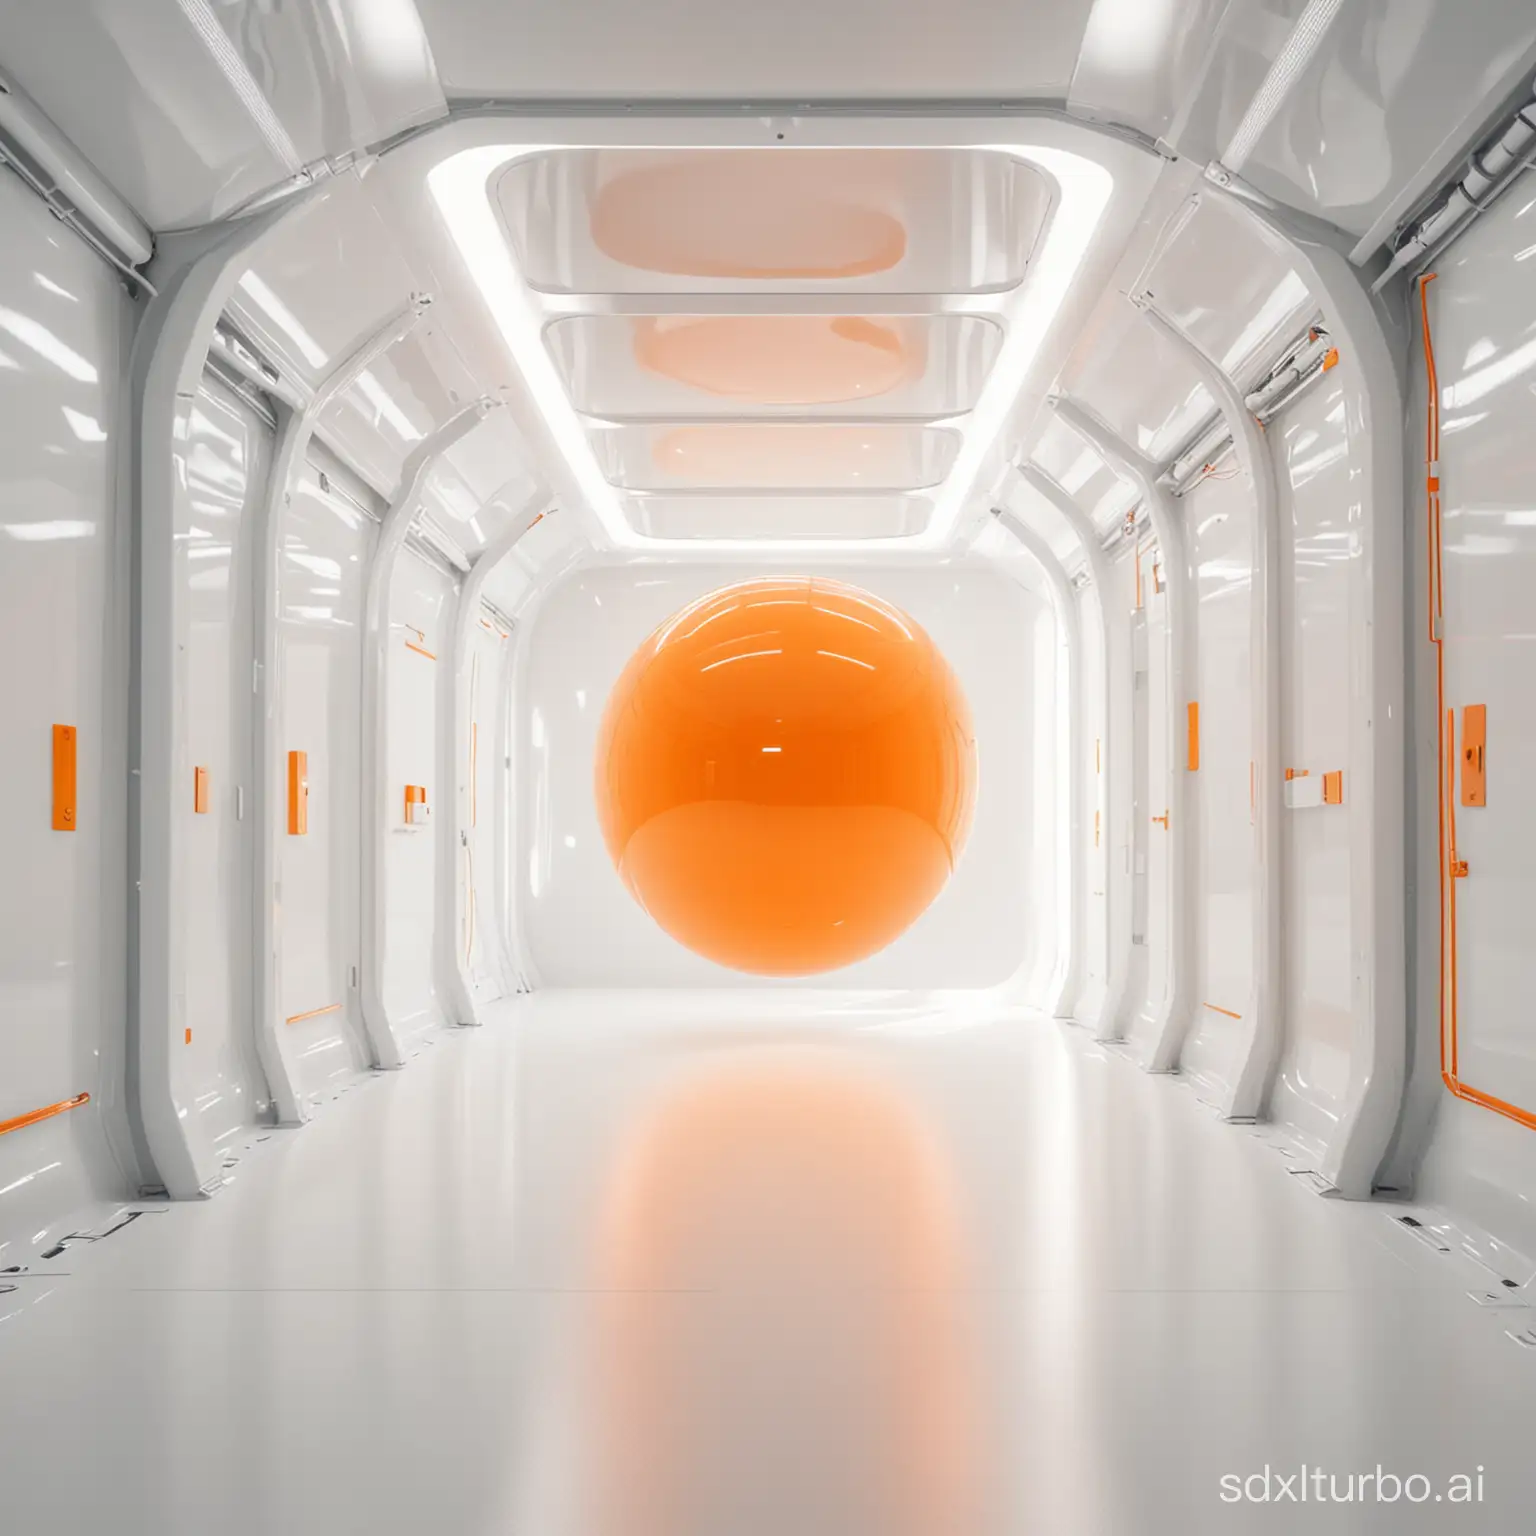 futuristic background with orange sphere on white, in the style of illuminated interiors, medicalcore, aerial view, rim light, solarization, superflat, passage